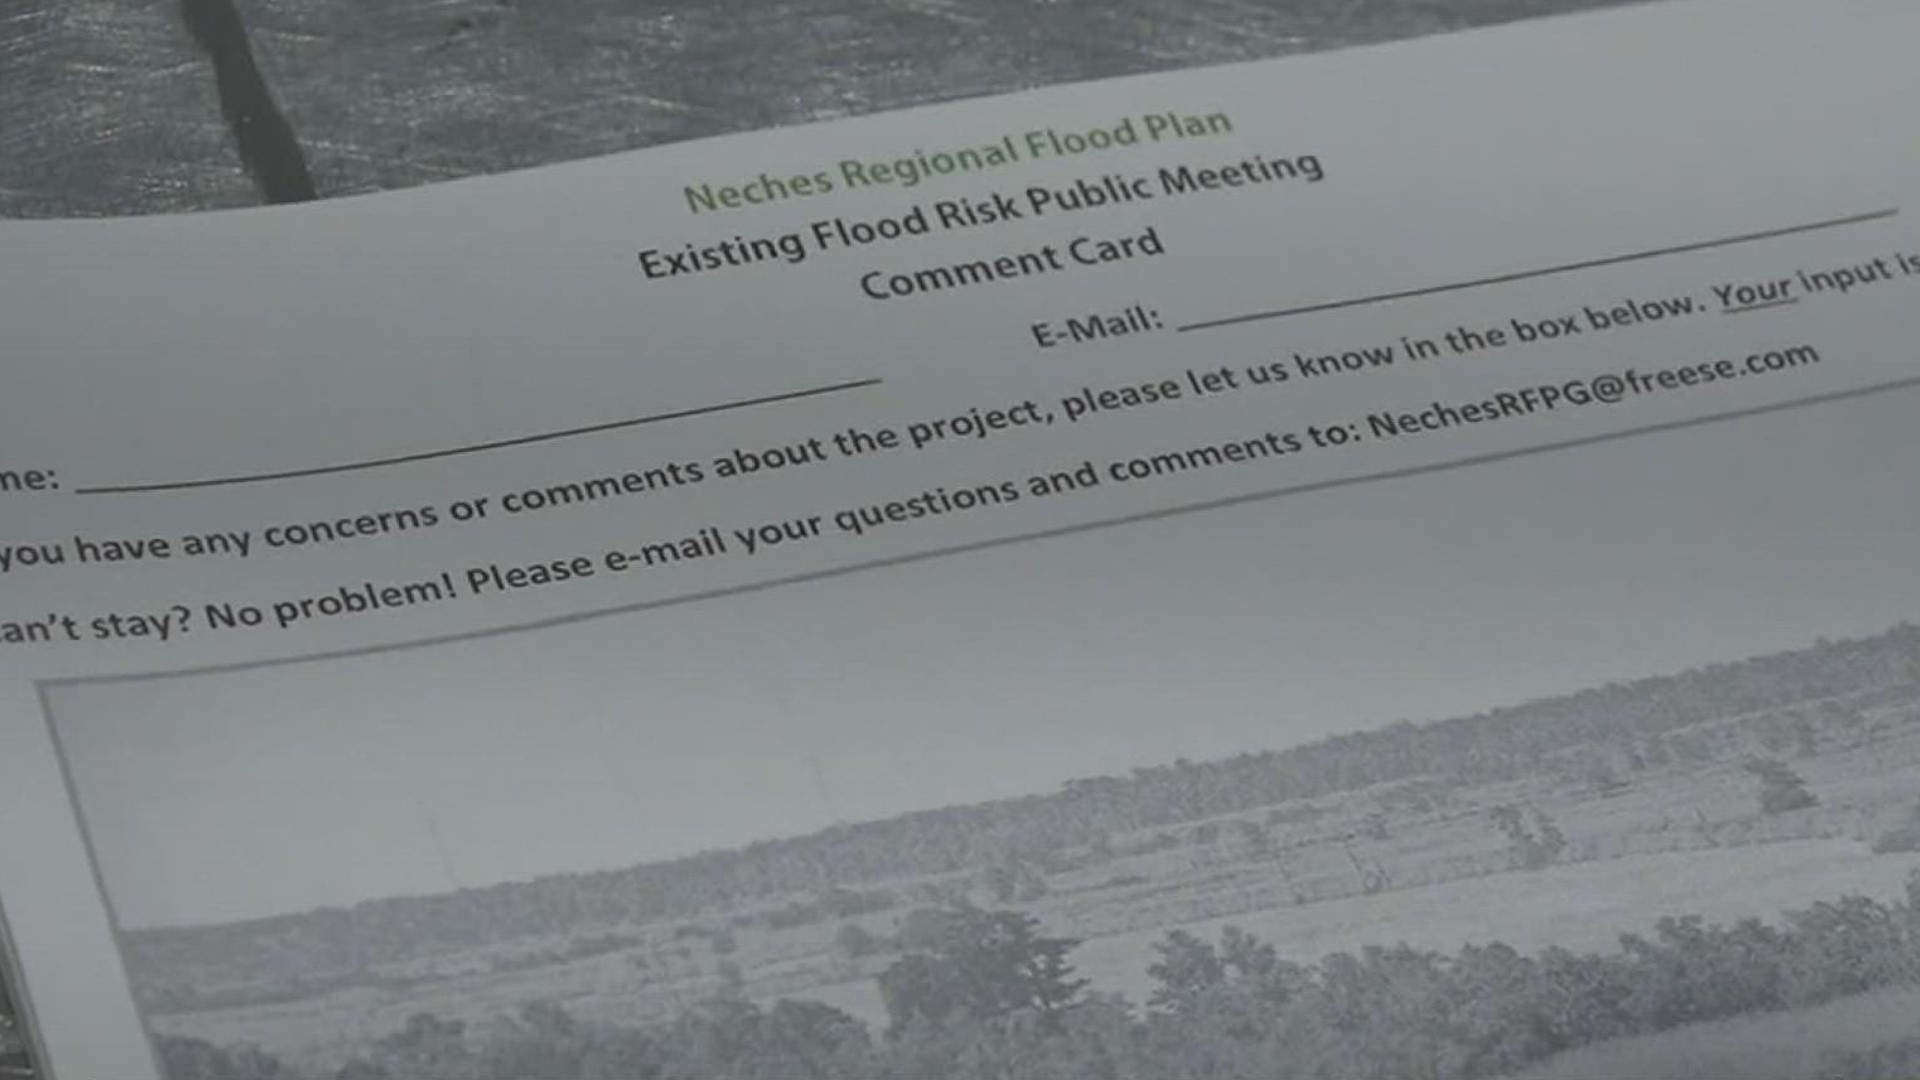 Leaders met with residents Tuesday nights to find out what areas face the highest risk.